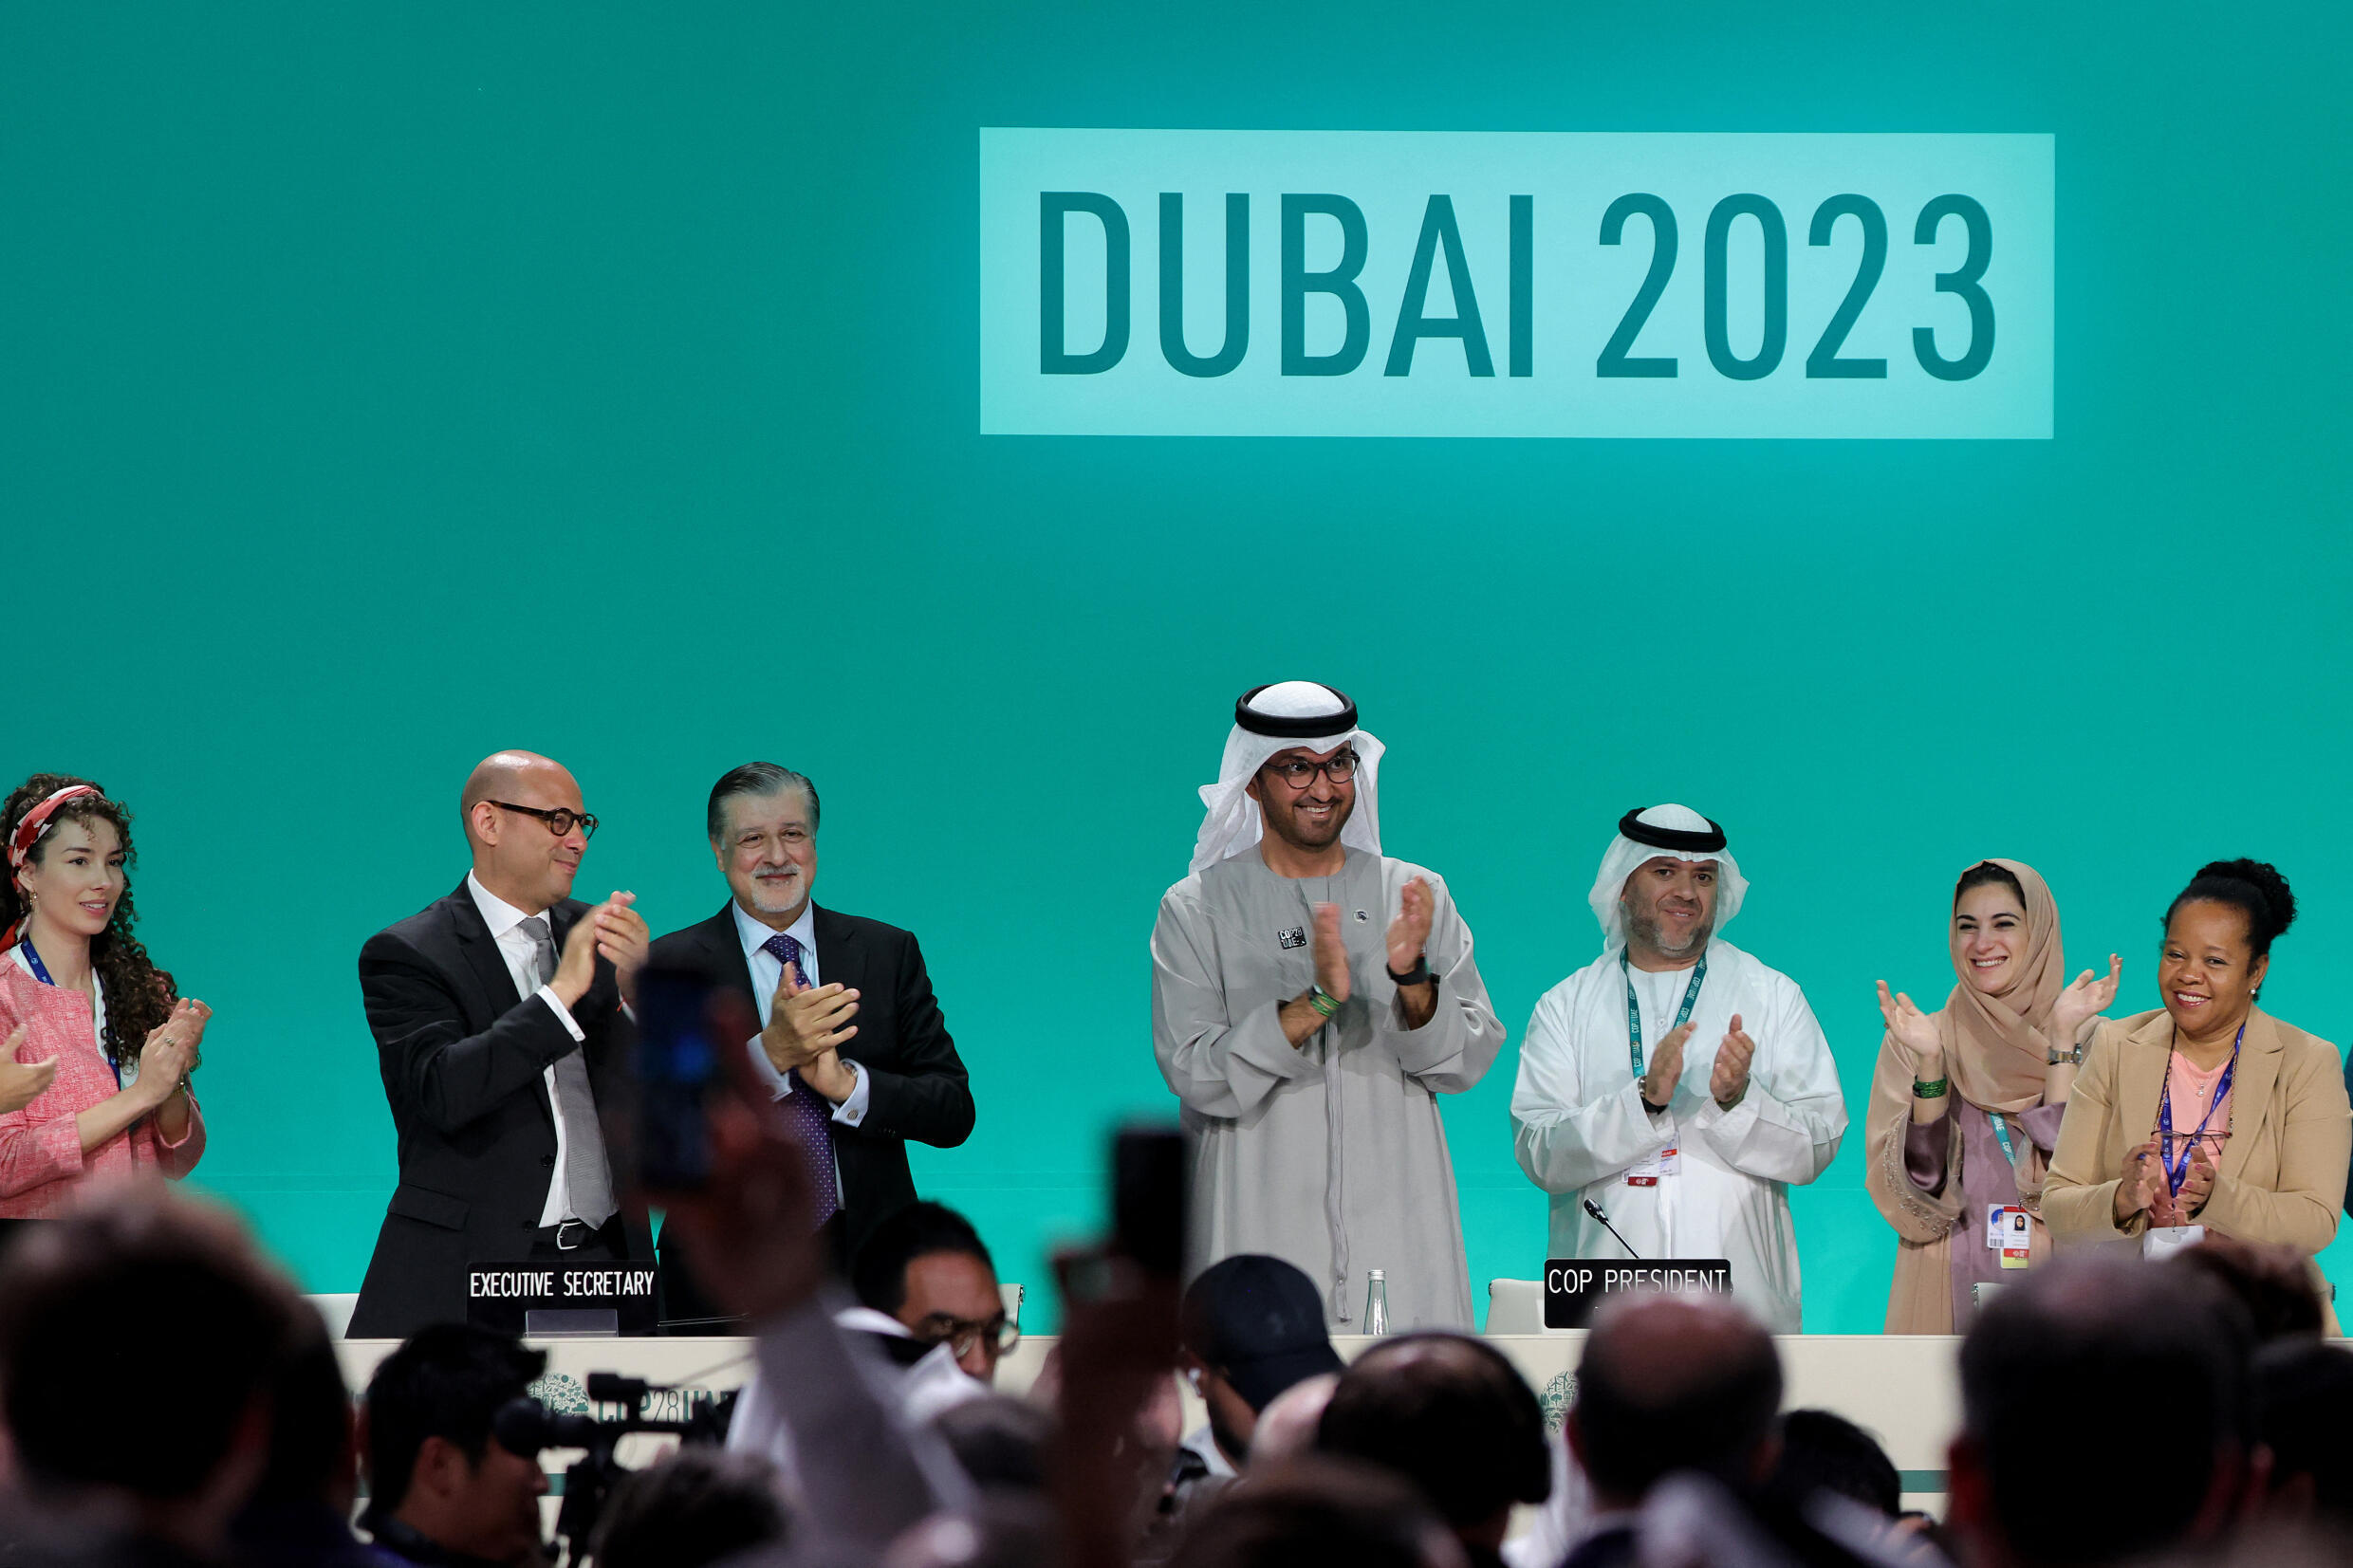 COP28 President Sultan al-Jaber announces the vote on the final agreement on December 13, 2023, in Dubai.